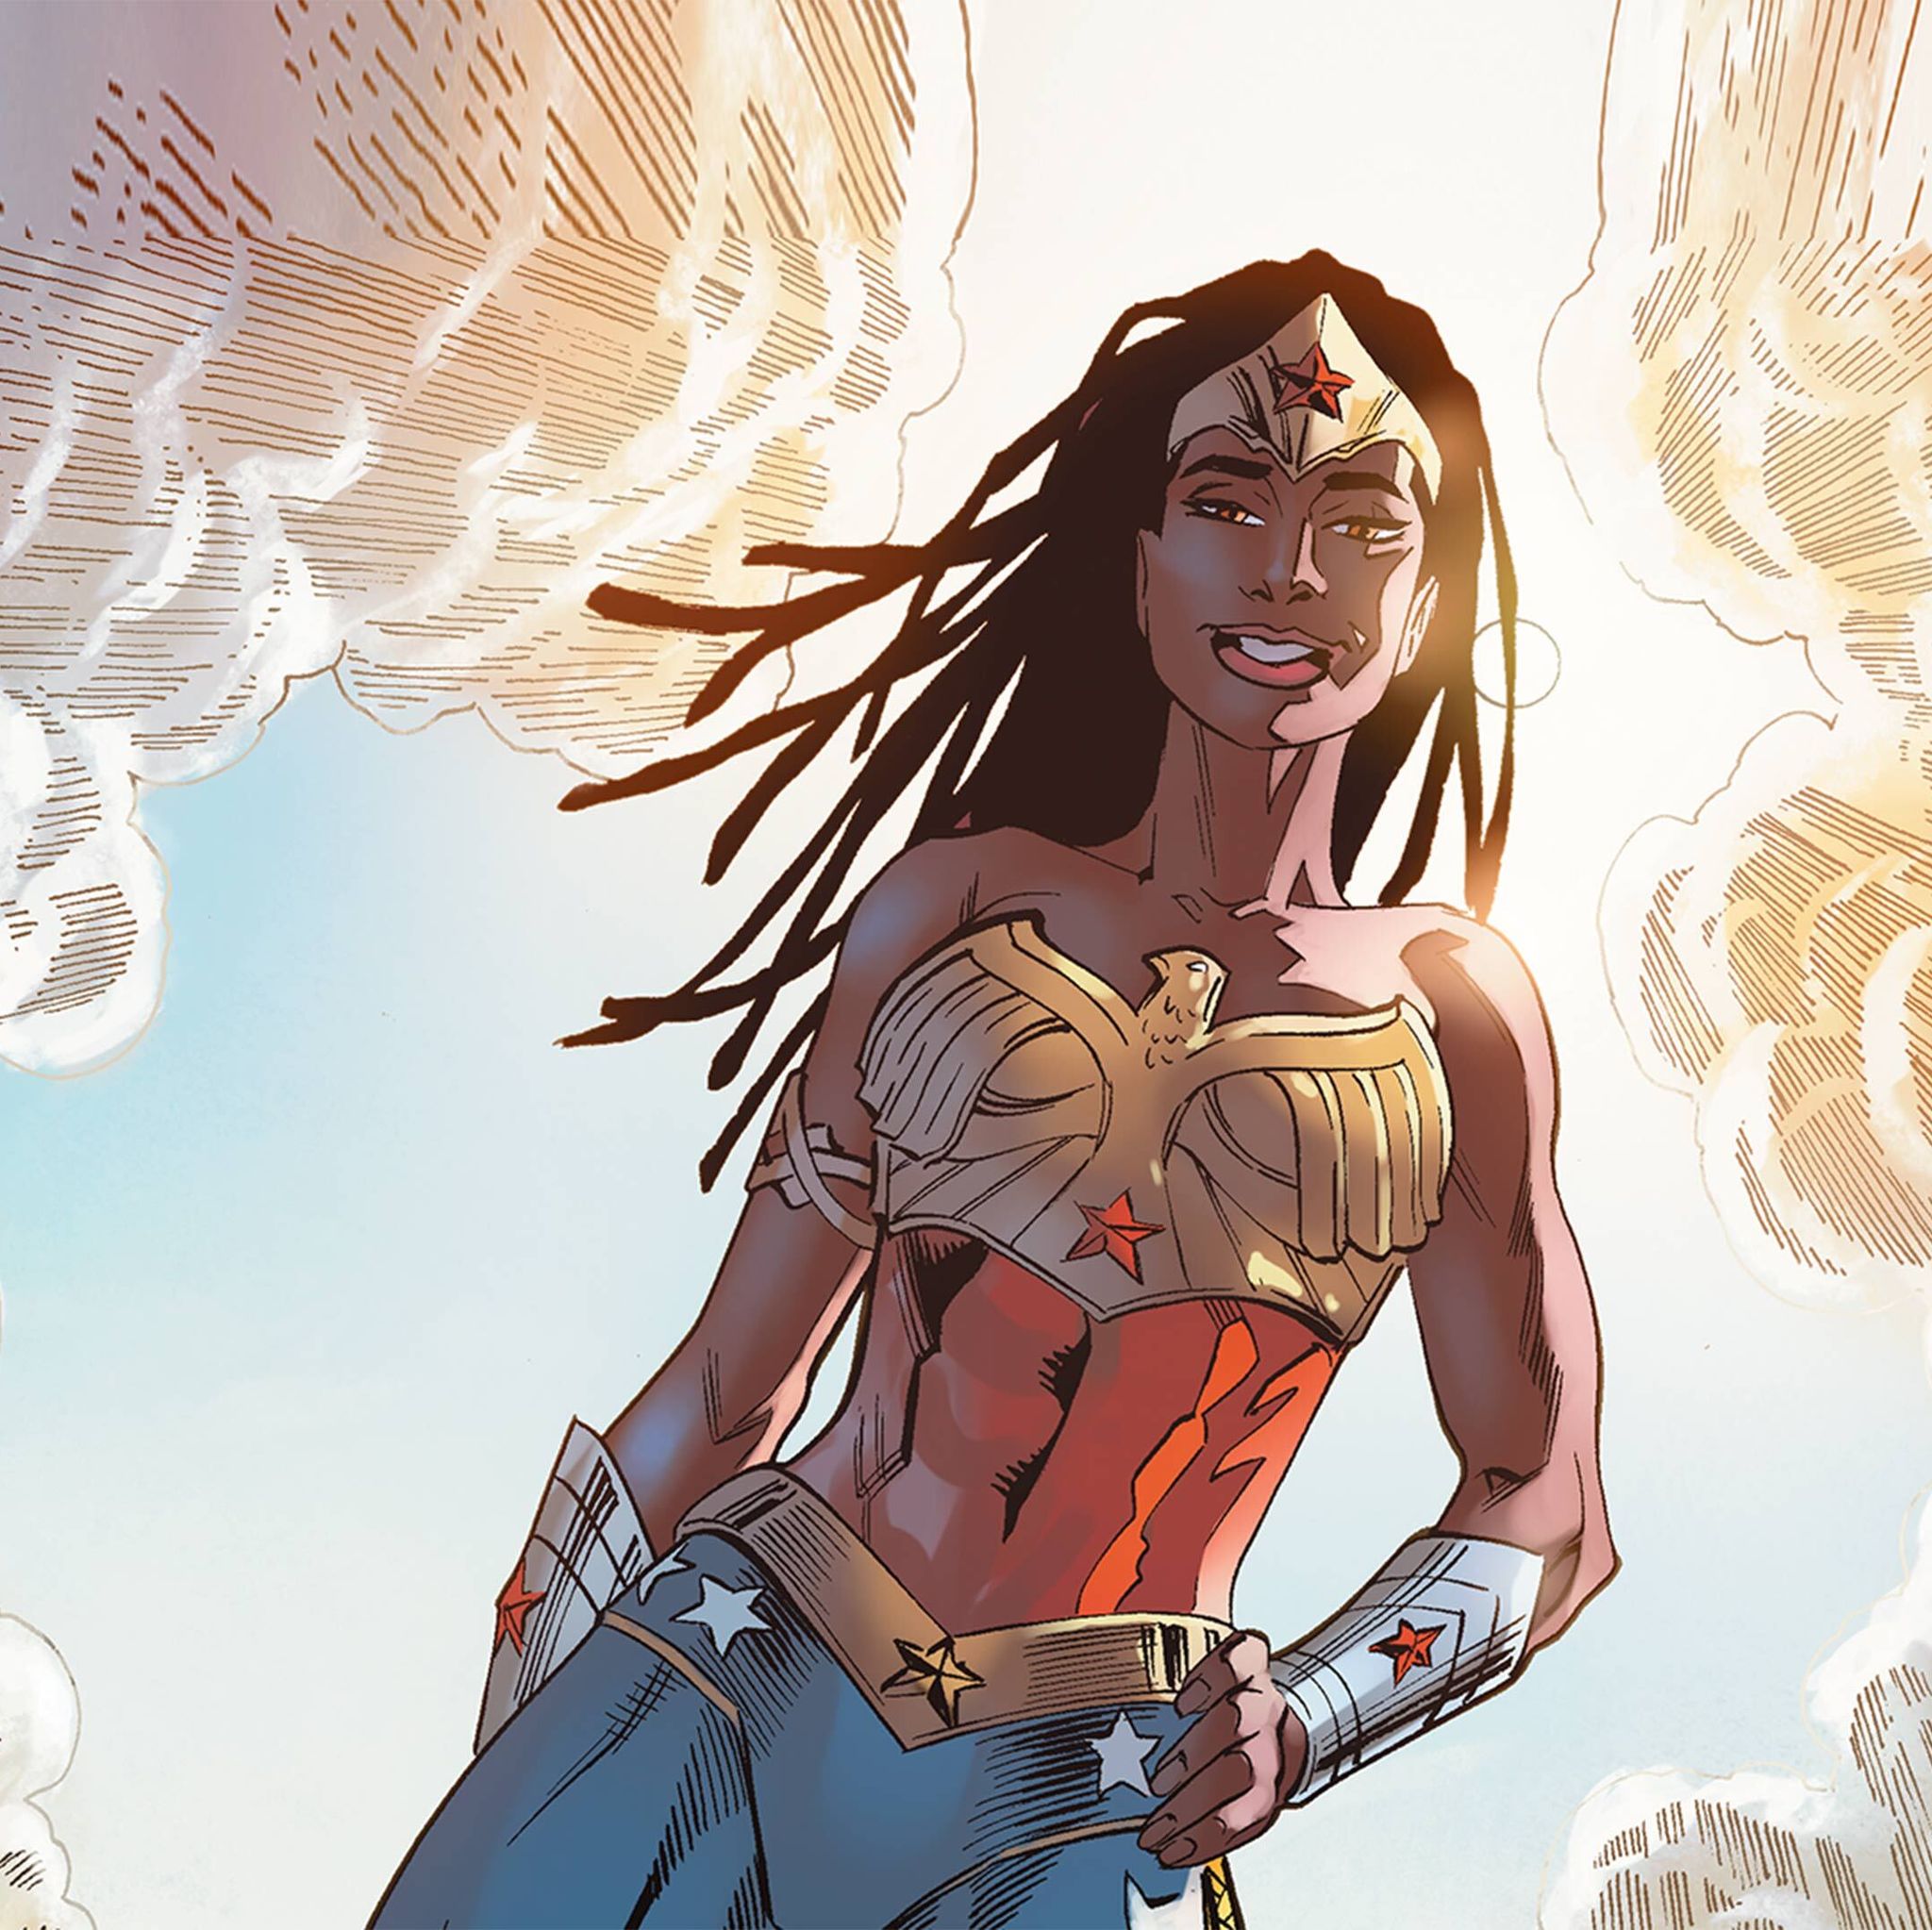 Wonder Woman Movie Characters Introduced in Comic Books